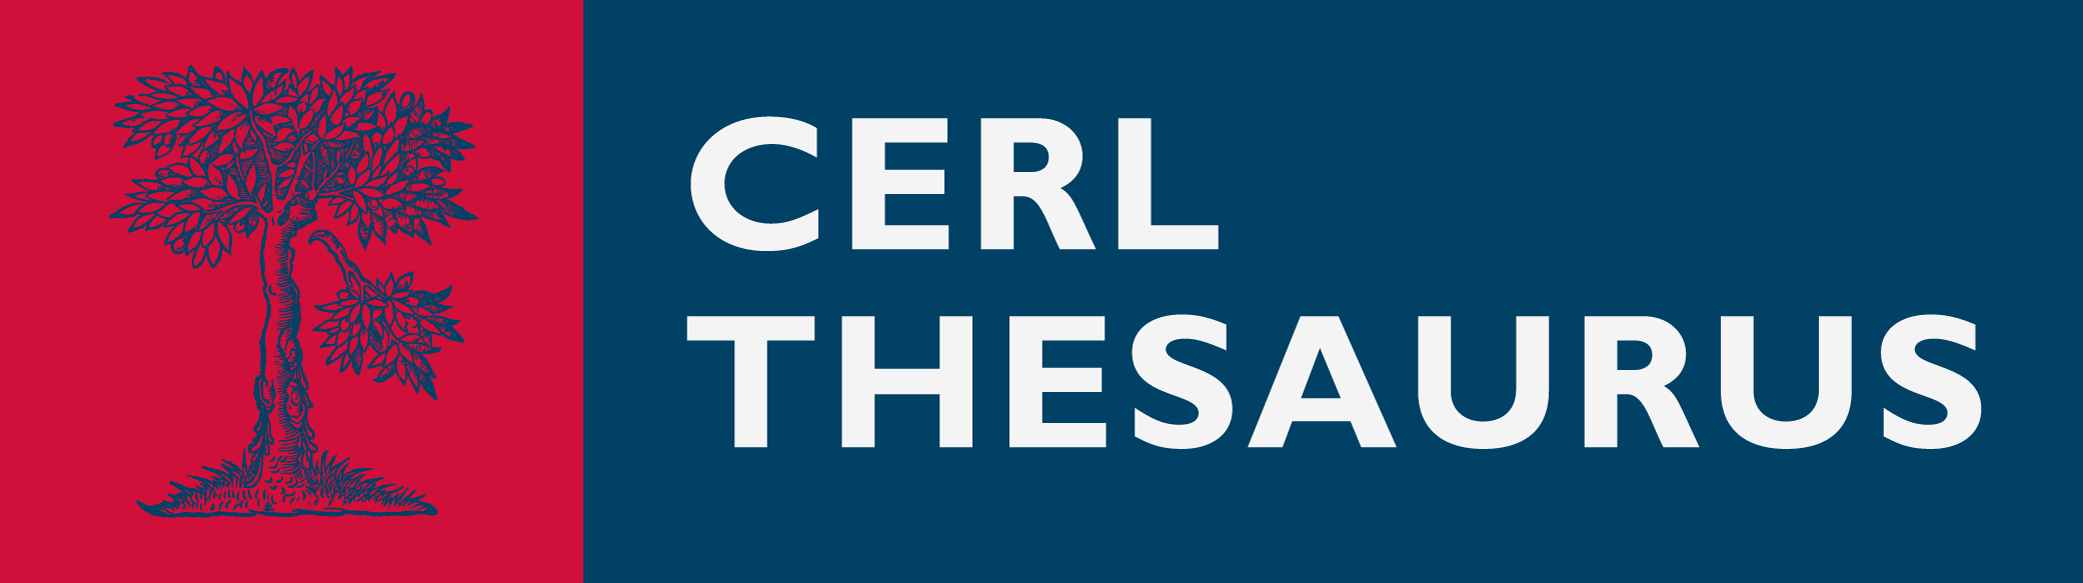 Search the CERL Thesaurus